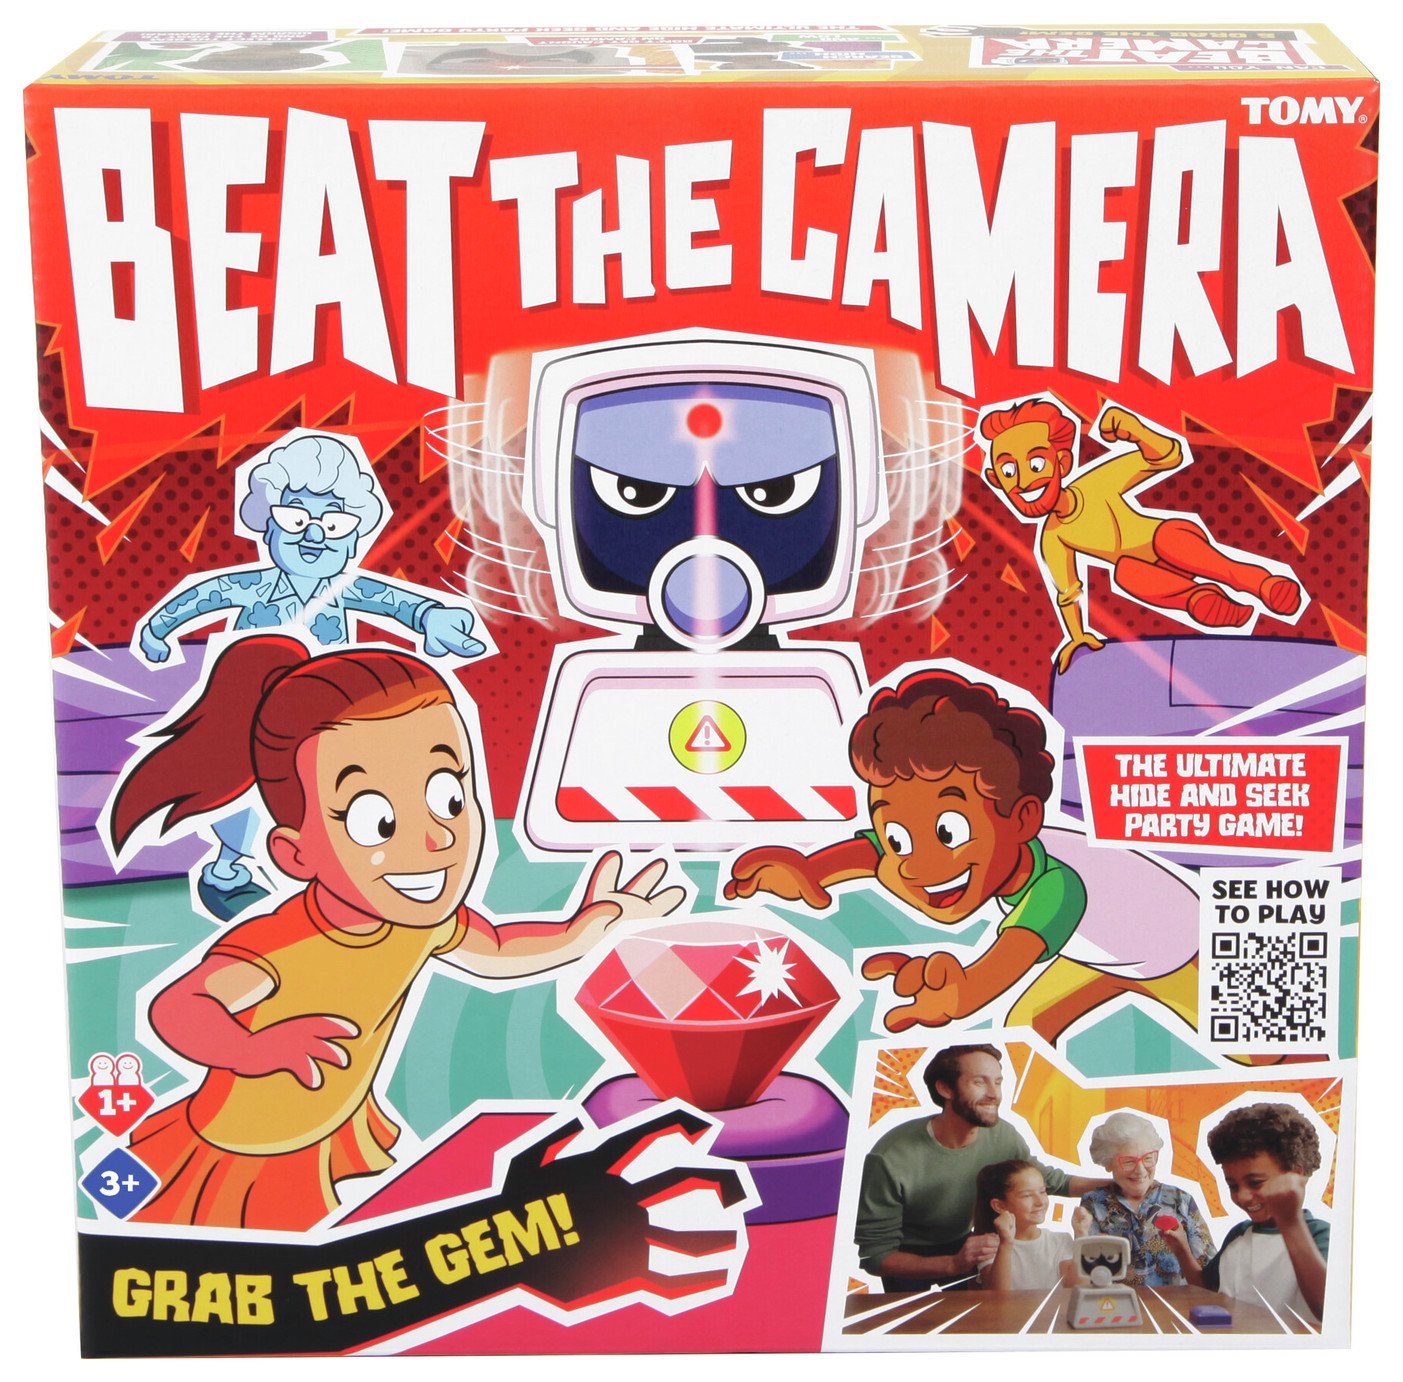 Tomy Beat The Camera Party Game review